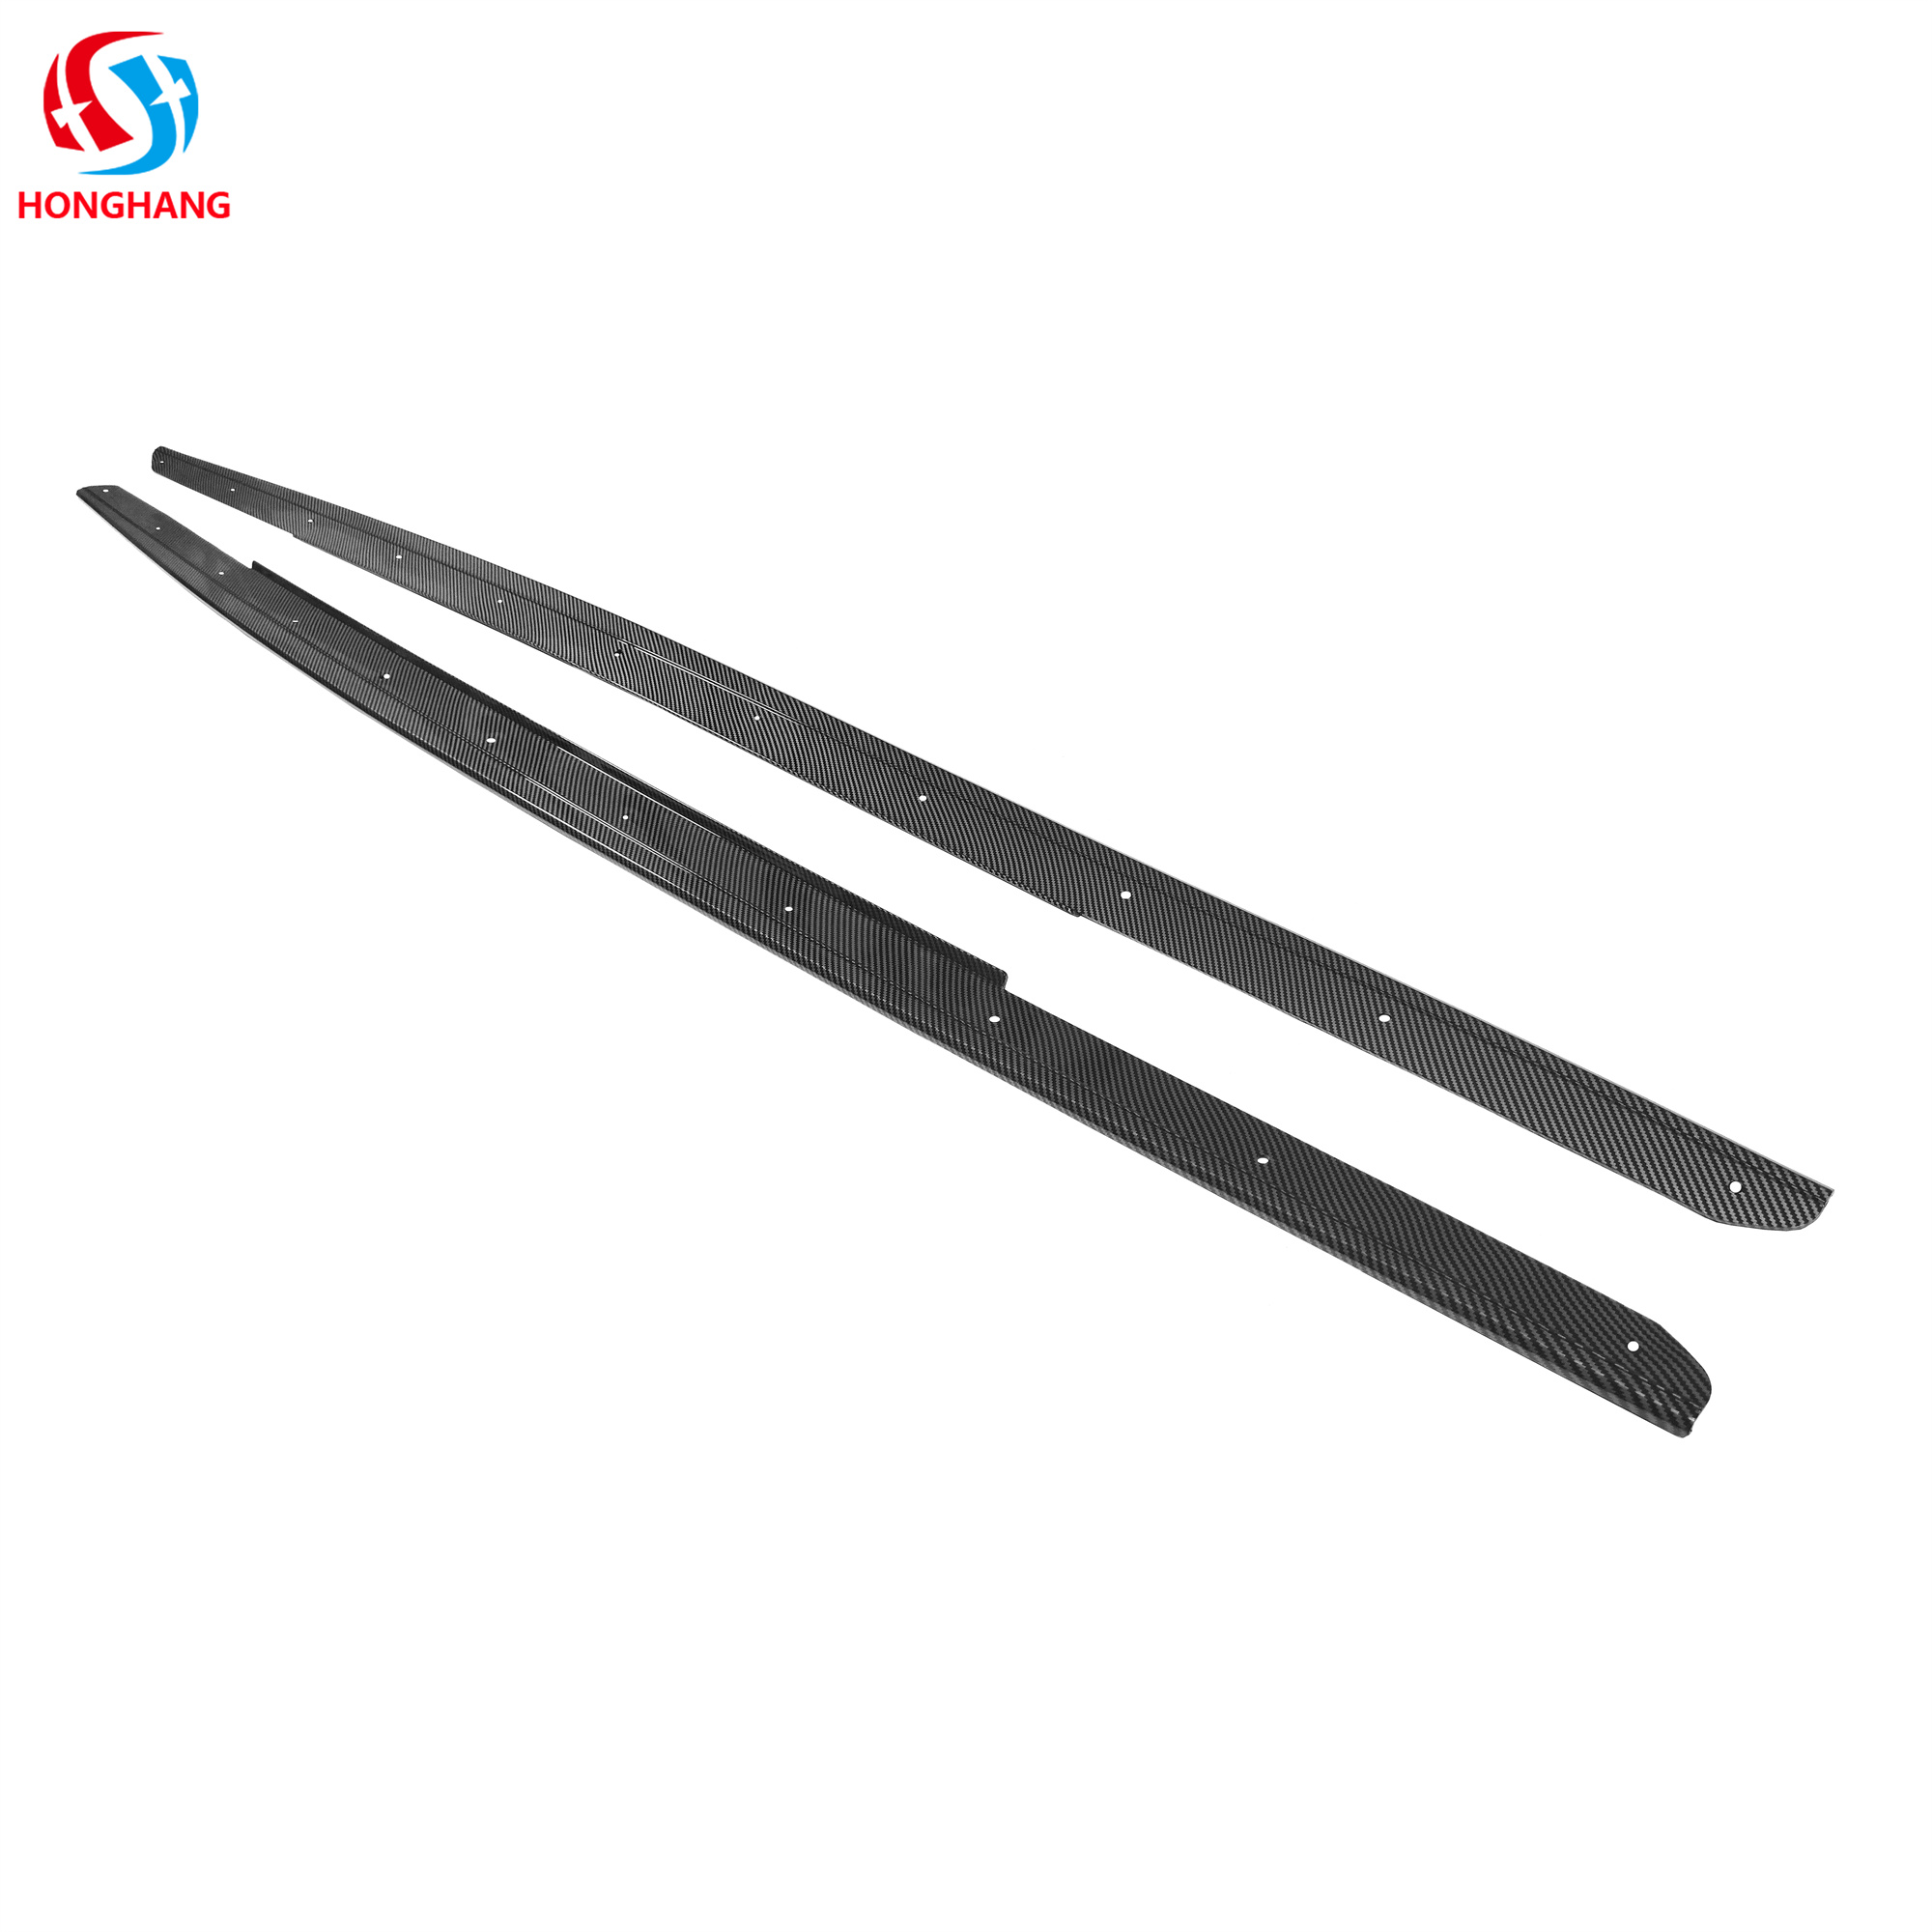 MP Style Side Skirt for Bmw 5 Series F10 F18 